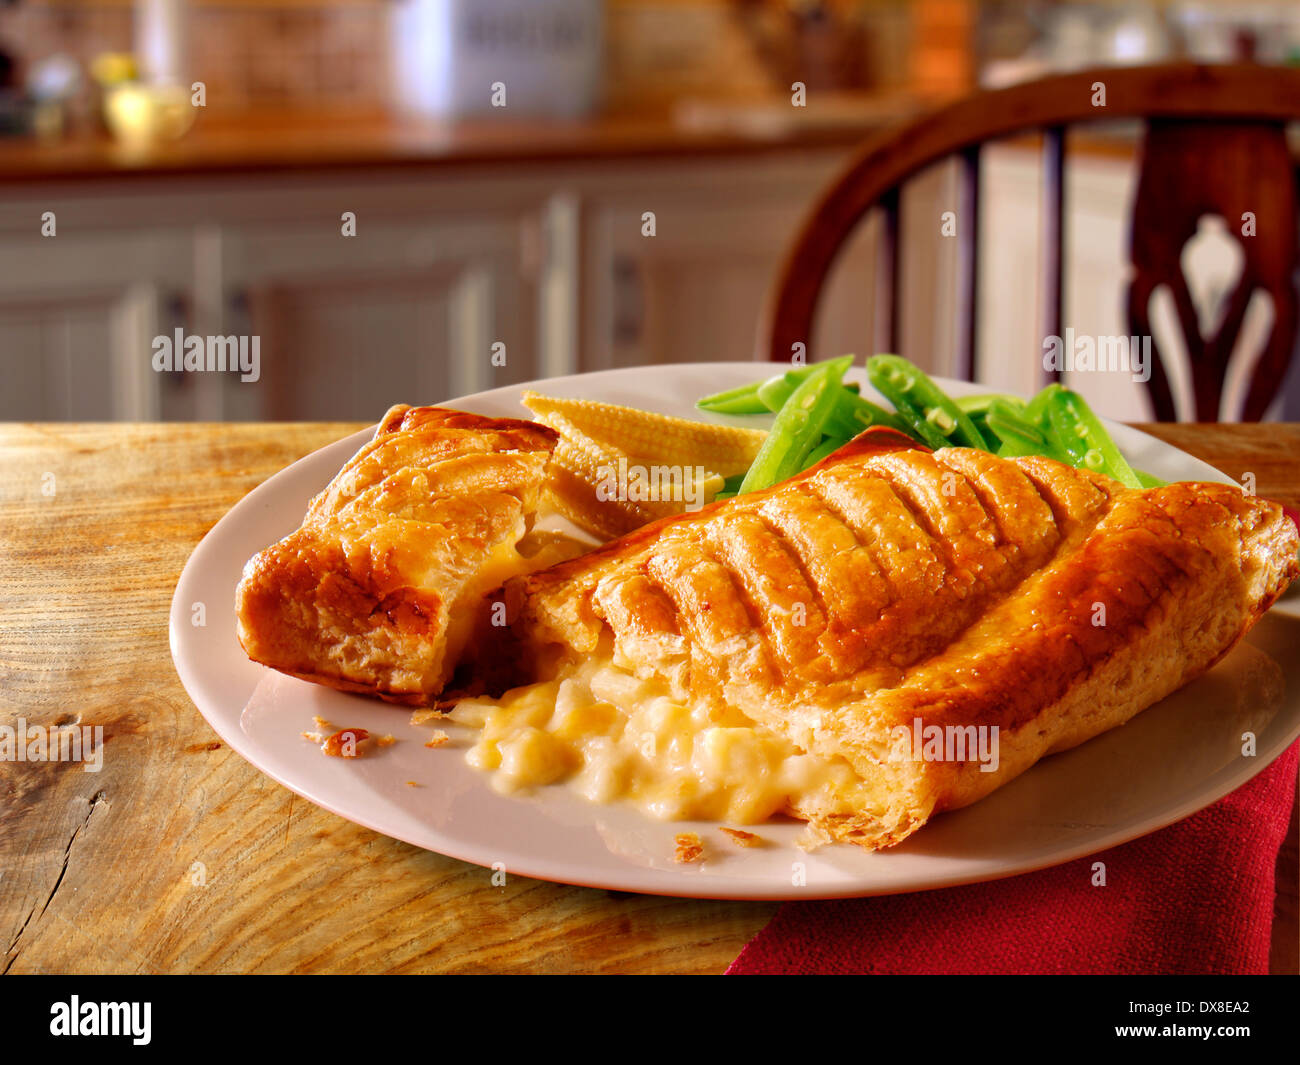 Traditional cheese lattice pasty slice meal served with green beans on a plate in a rustic homely kitchen setting Stock Photo